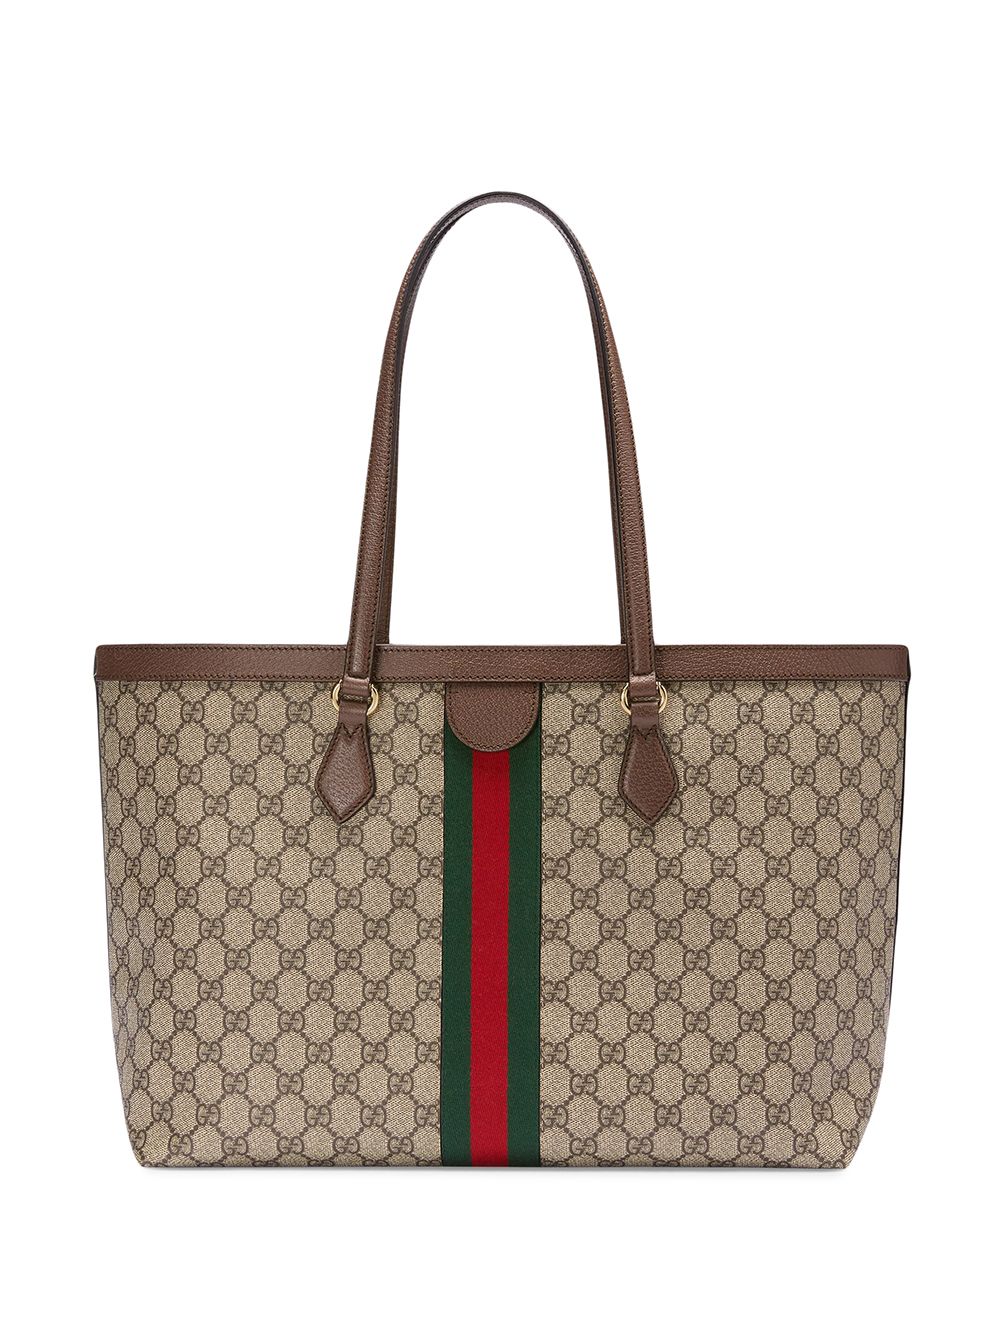 GUCCI Elegant Beige & Ebony GG Supreme Canvas Tote Bag with Leather Trims and Iconic Strips, 38x28x14cm